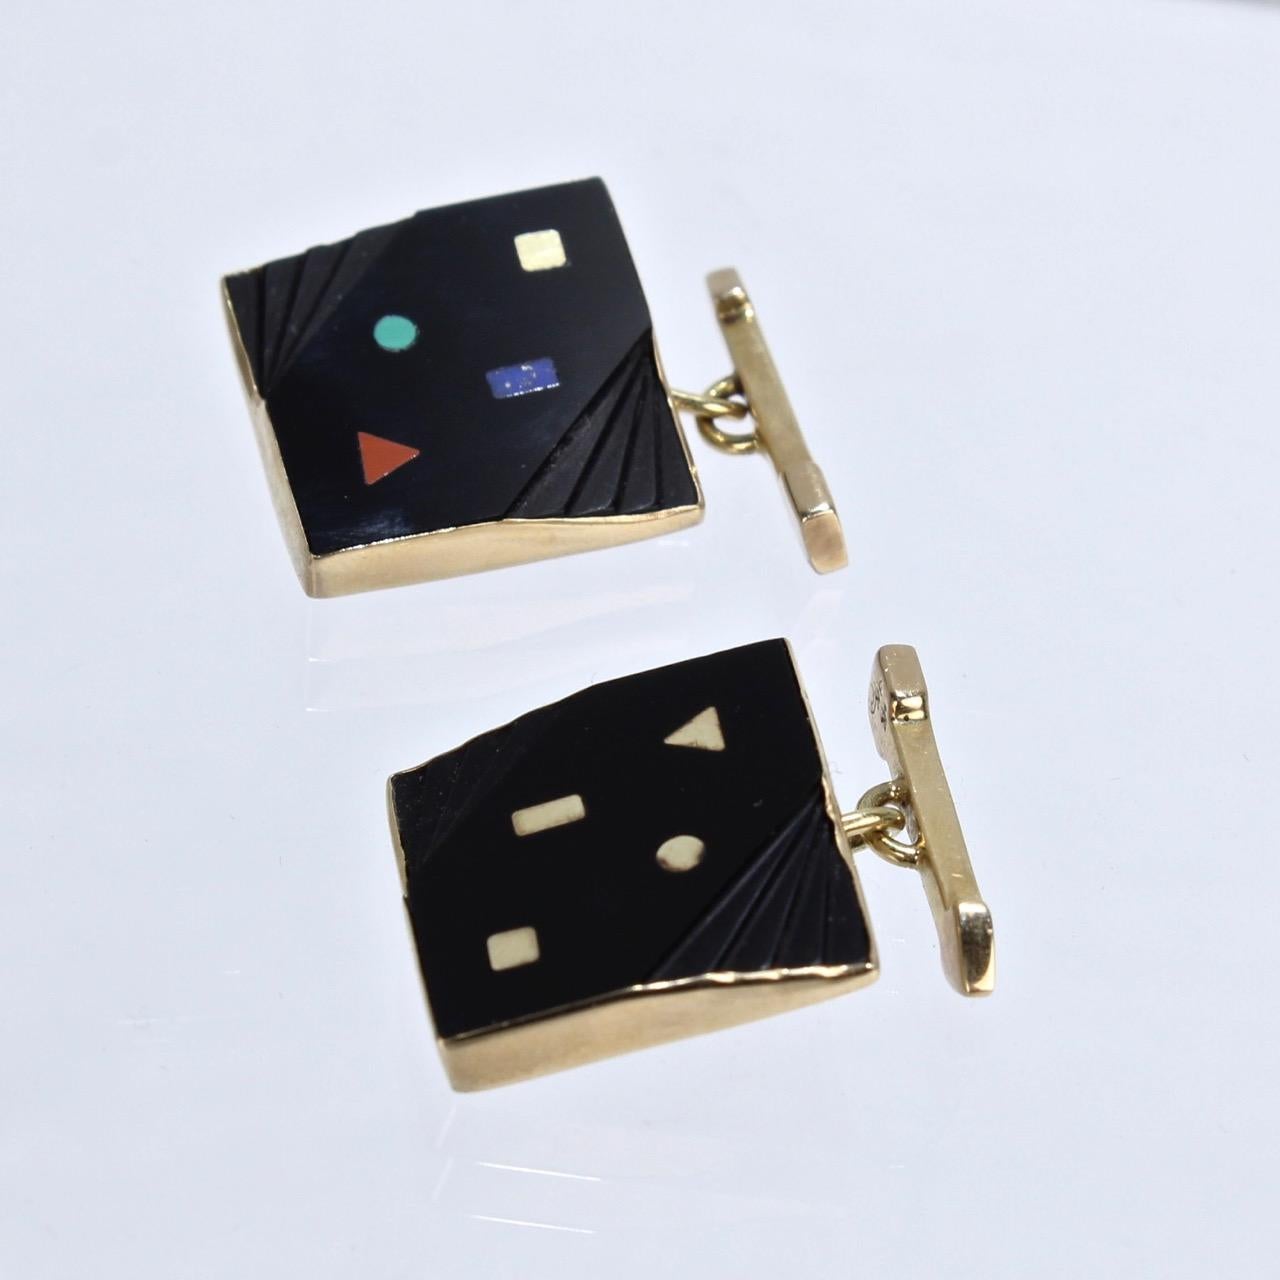 A very fine set of bezel set onyx and gold cufflinks by Isabelle Posillico in the 1980's Memphis school style.   

Each with bezel set square onyx gemstones that have stepped, angular cuts to the side and are inset with gold, coral, lapis and